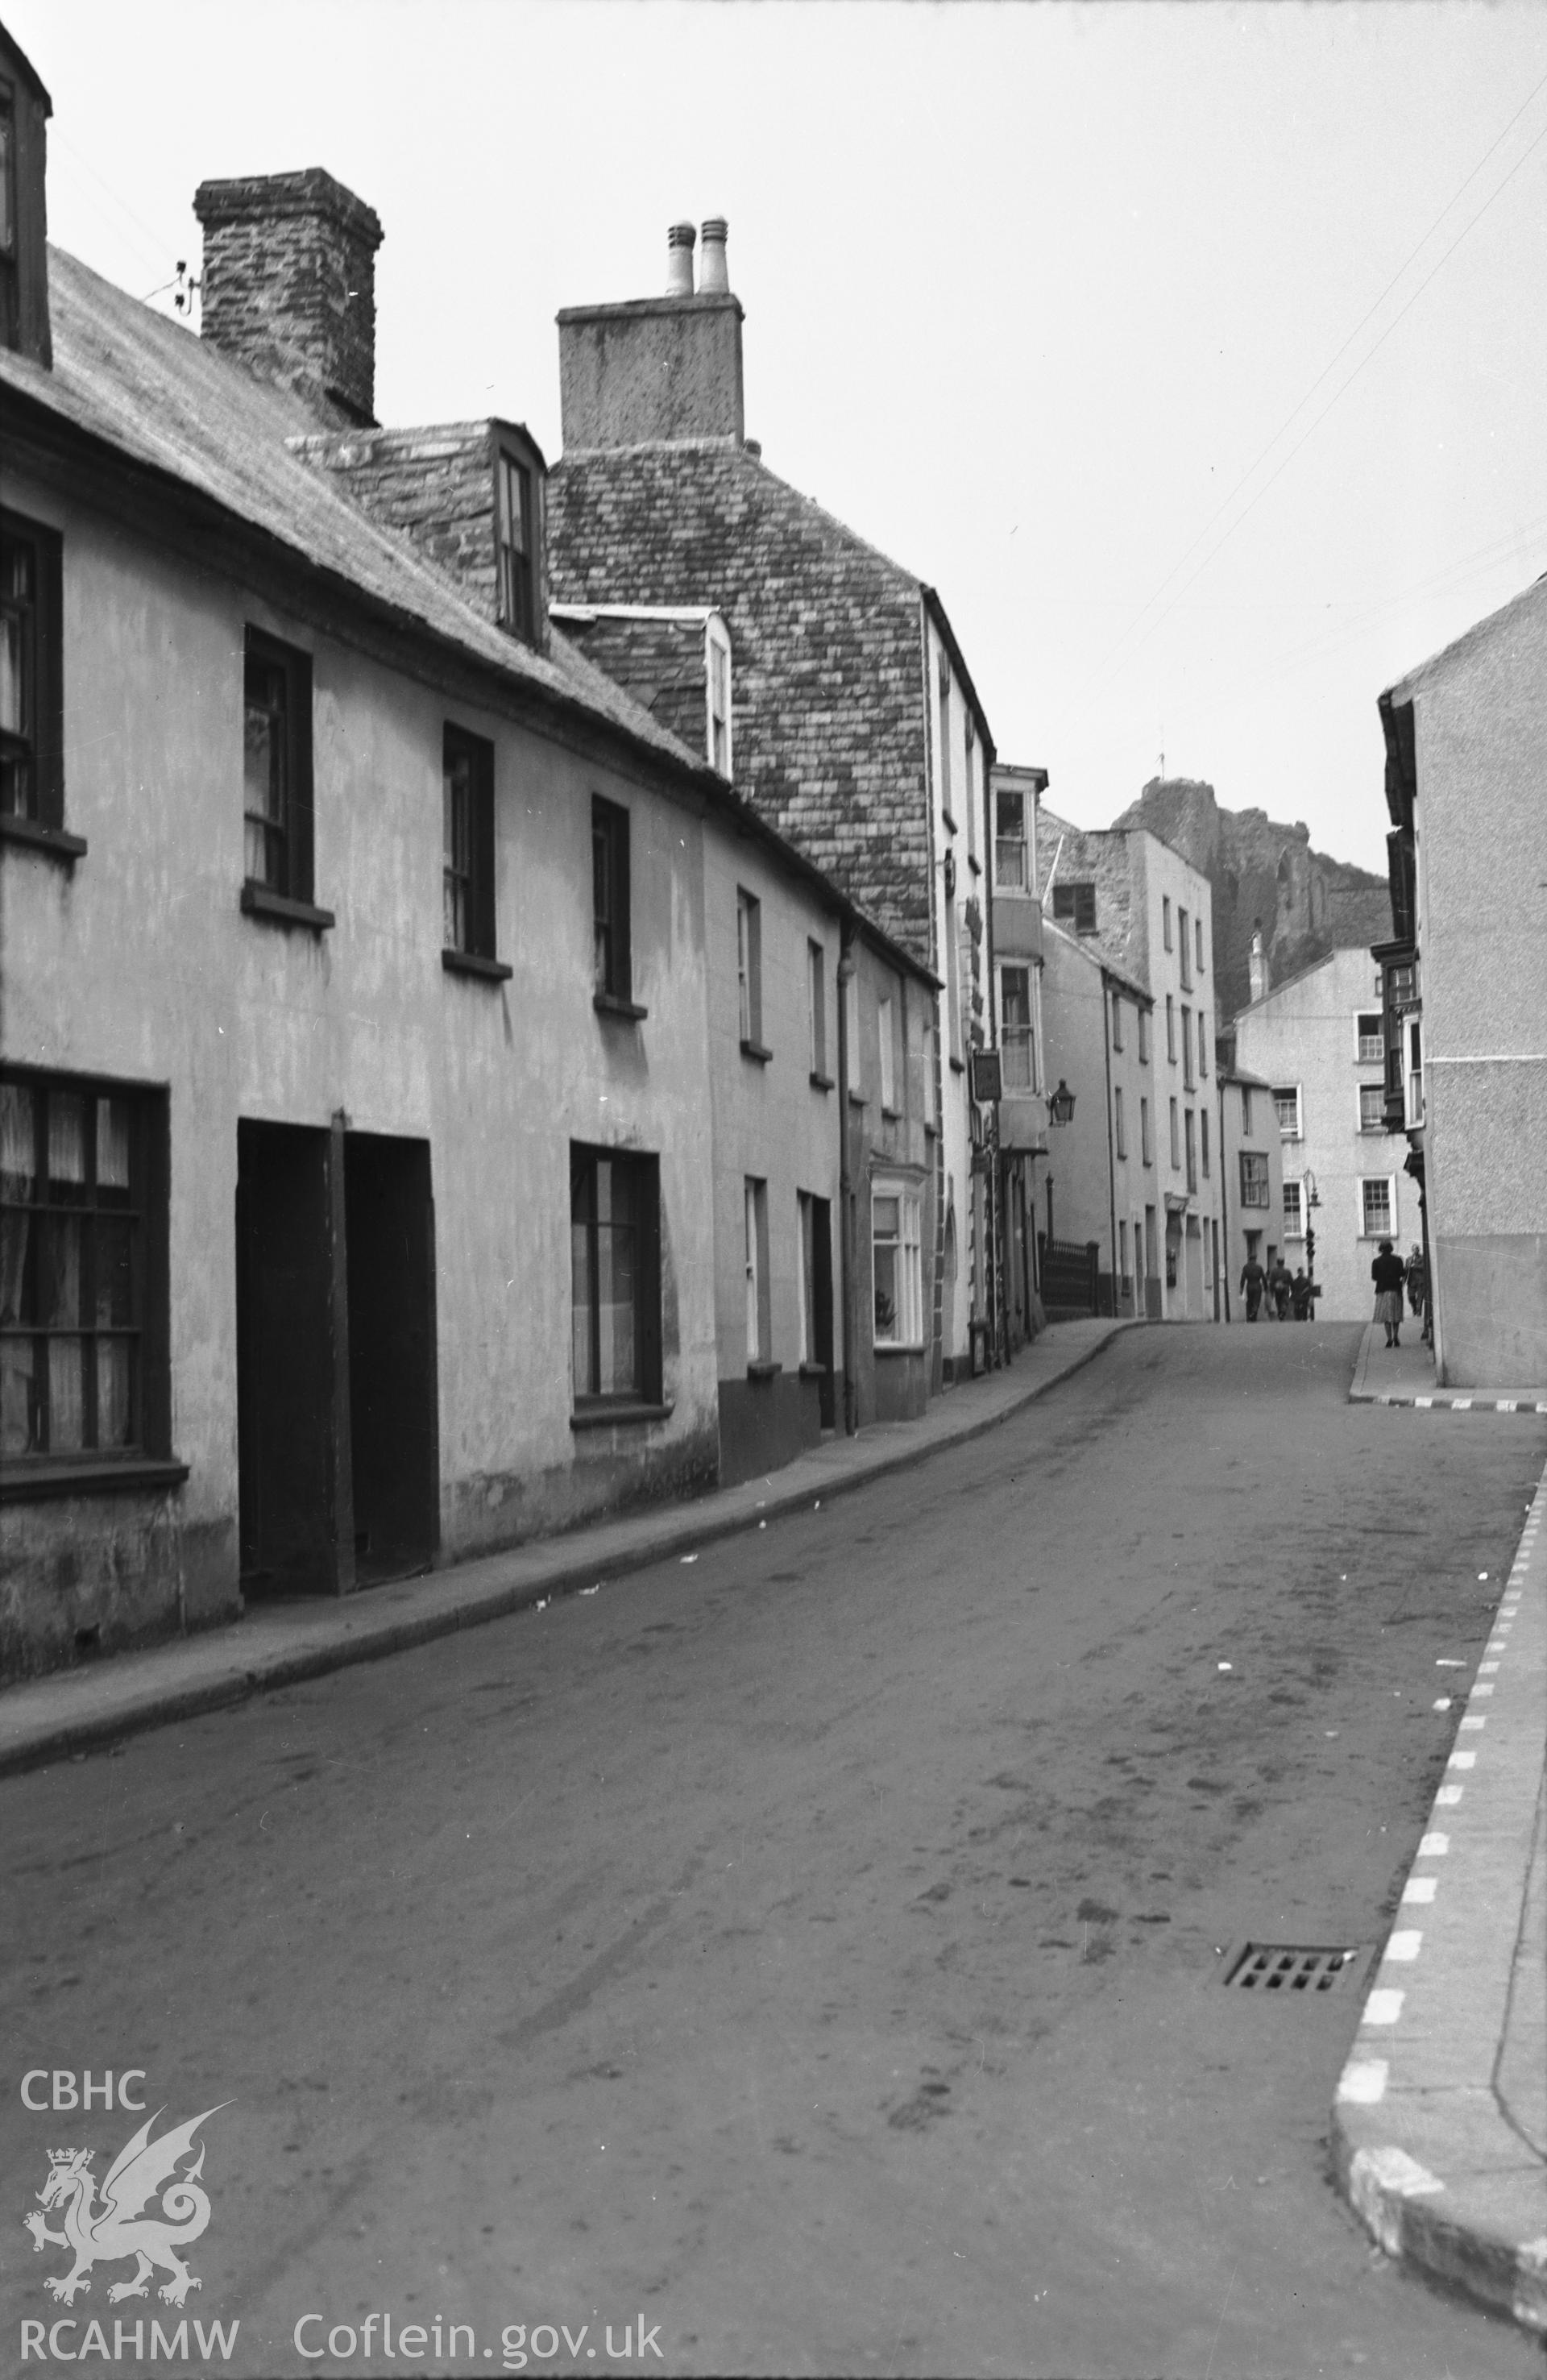 A black and white print showing Quay Street, Haverfordwest.